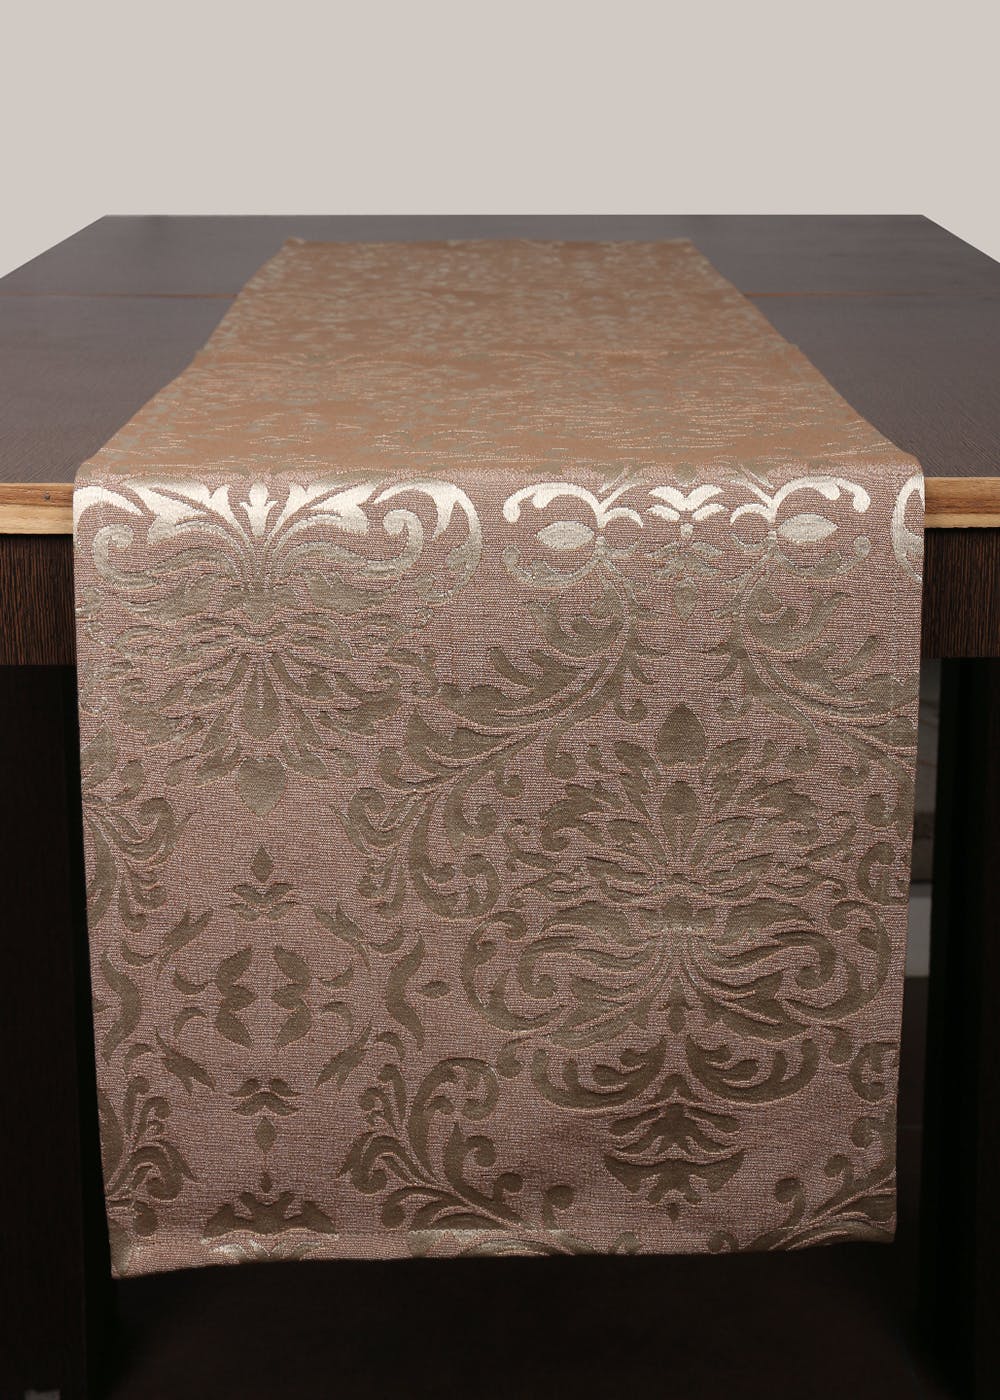 Cotton Jacquard Self Design Damask Table Runner 6 Seater (13x84 inches) - Brown